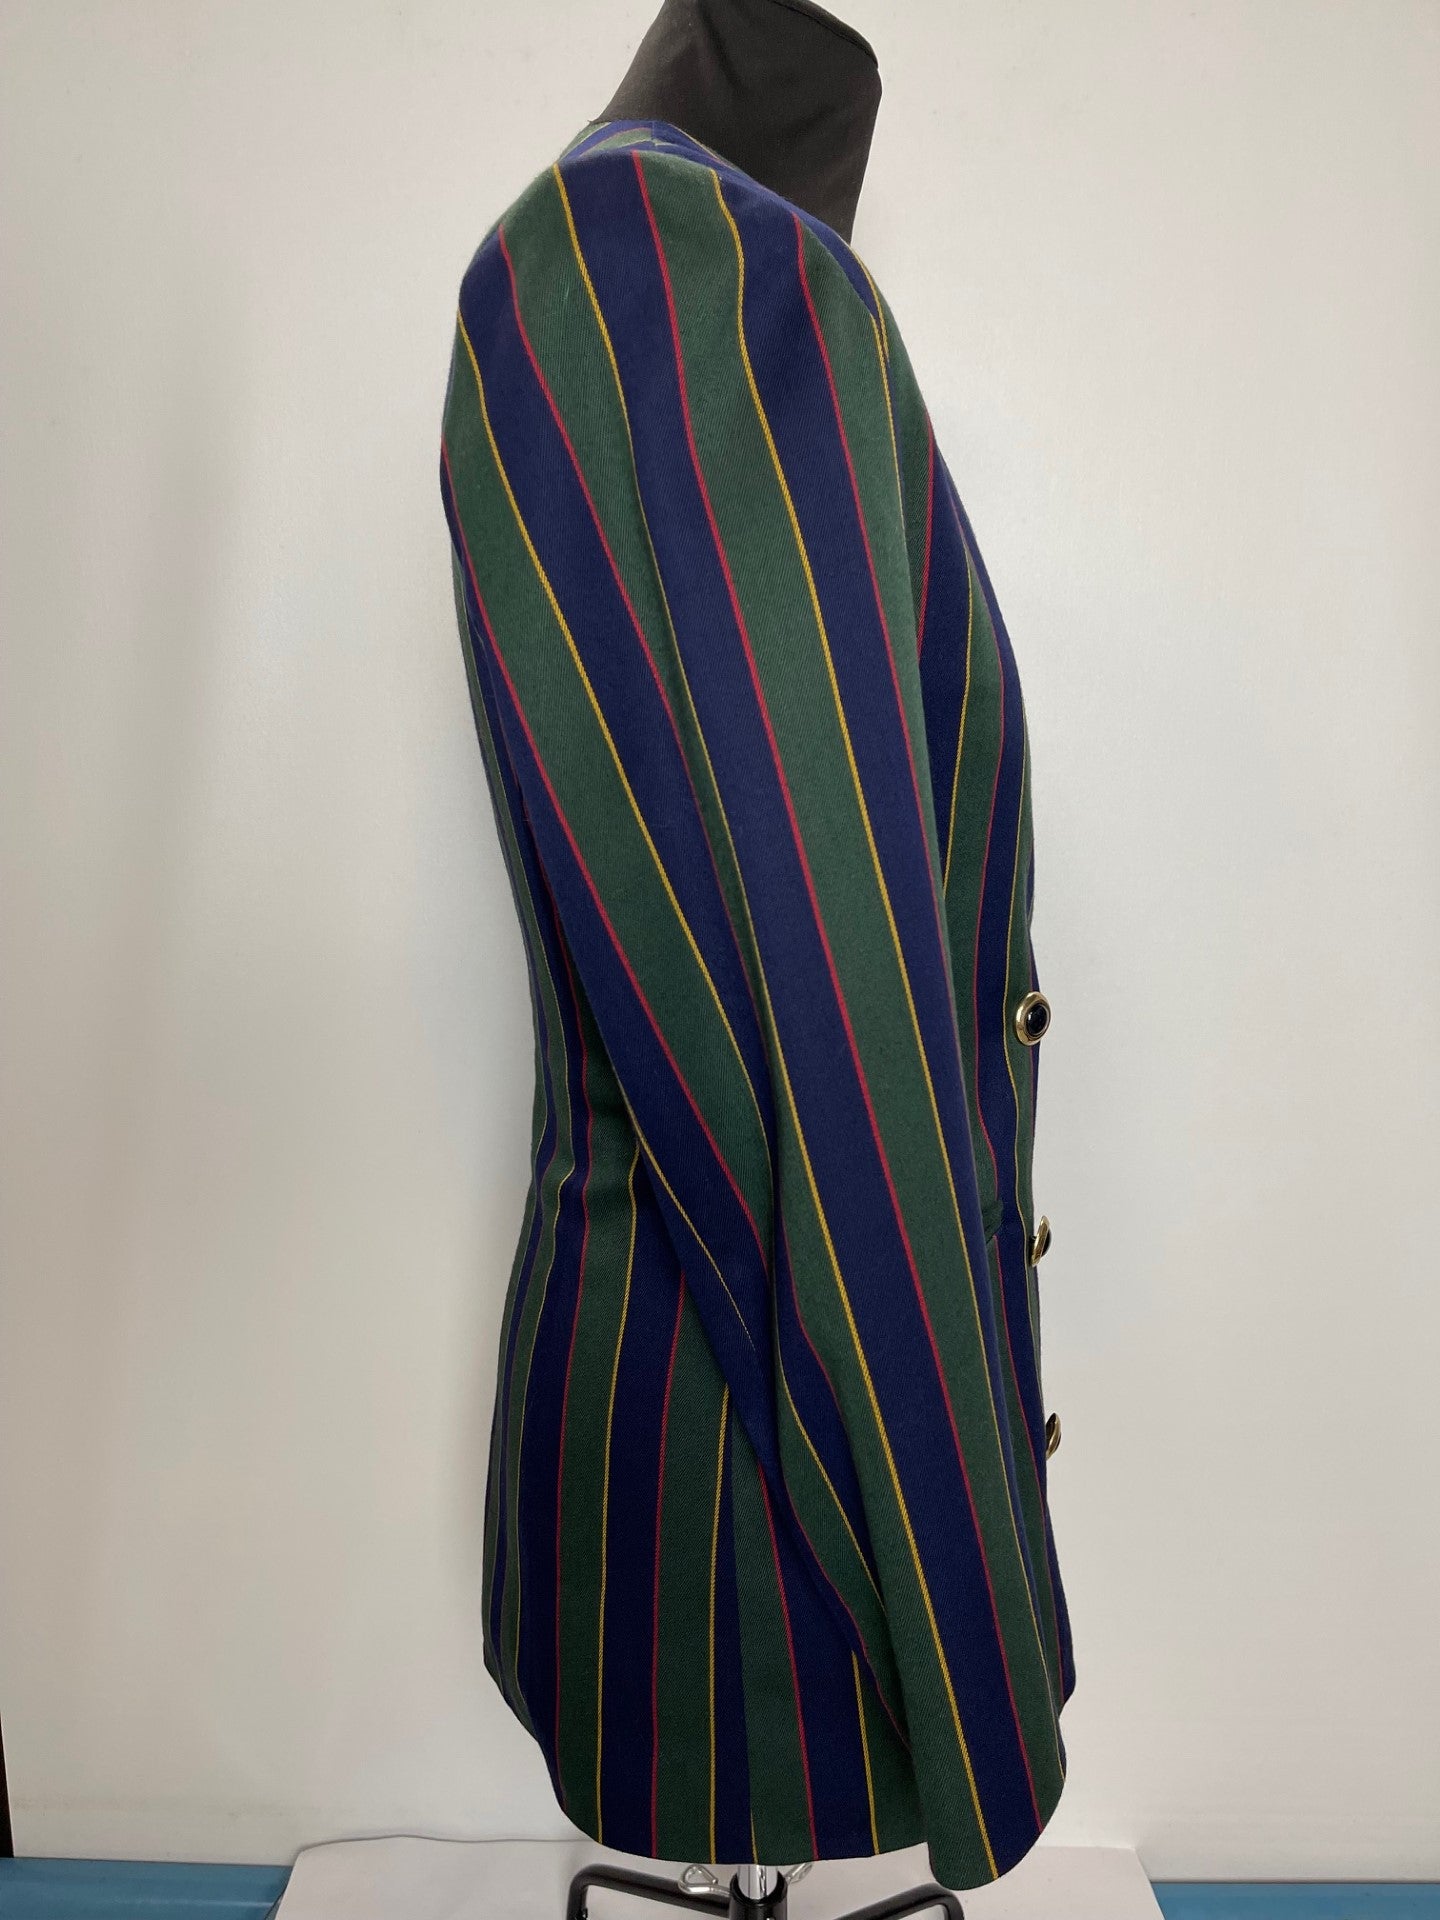 Message Vintage Blue and Green Striped Blazer Size 10